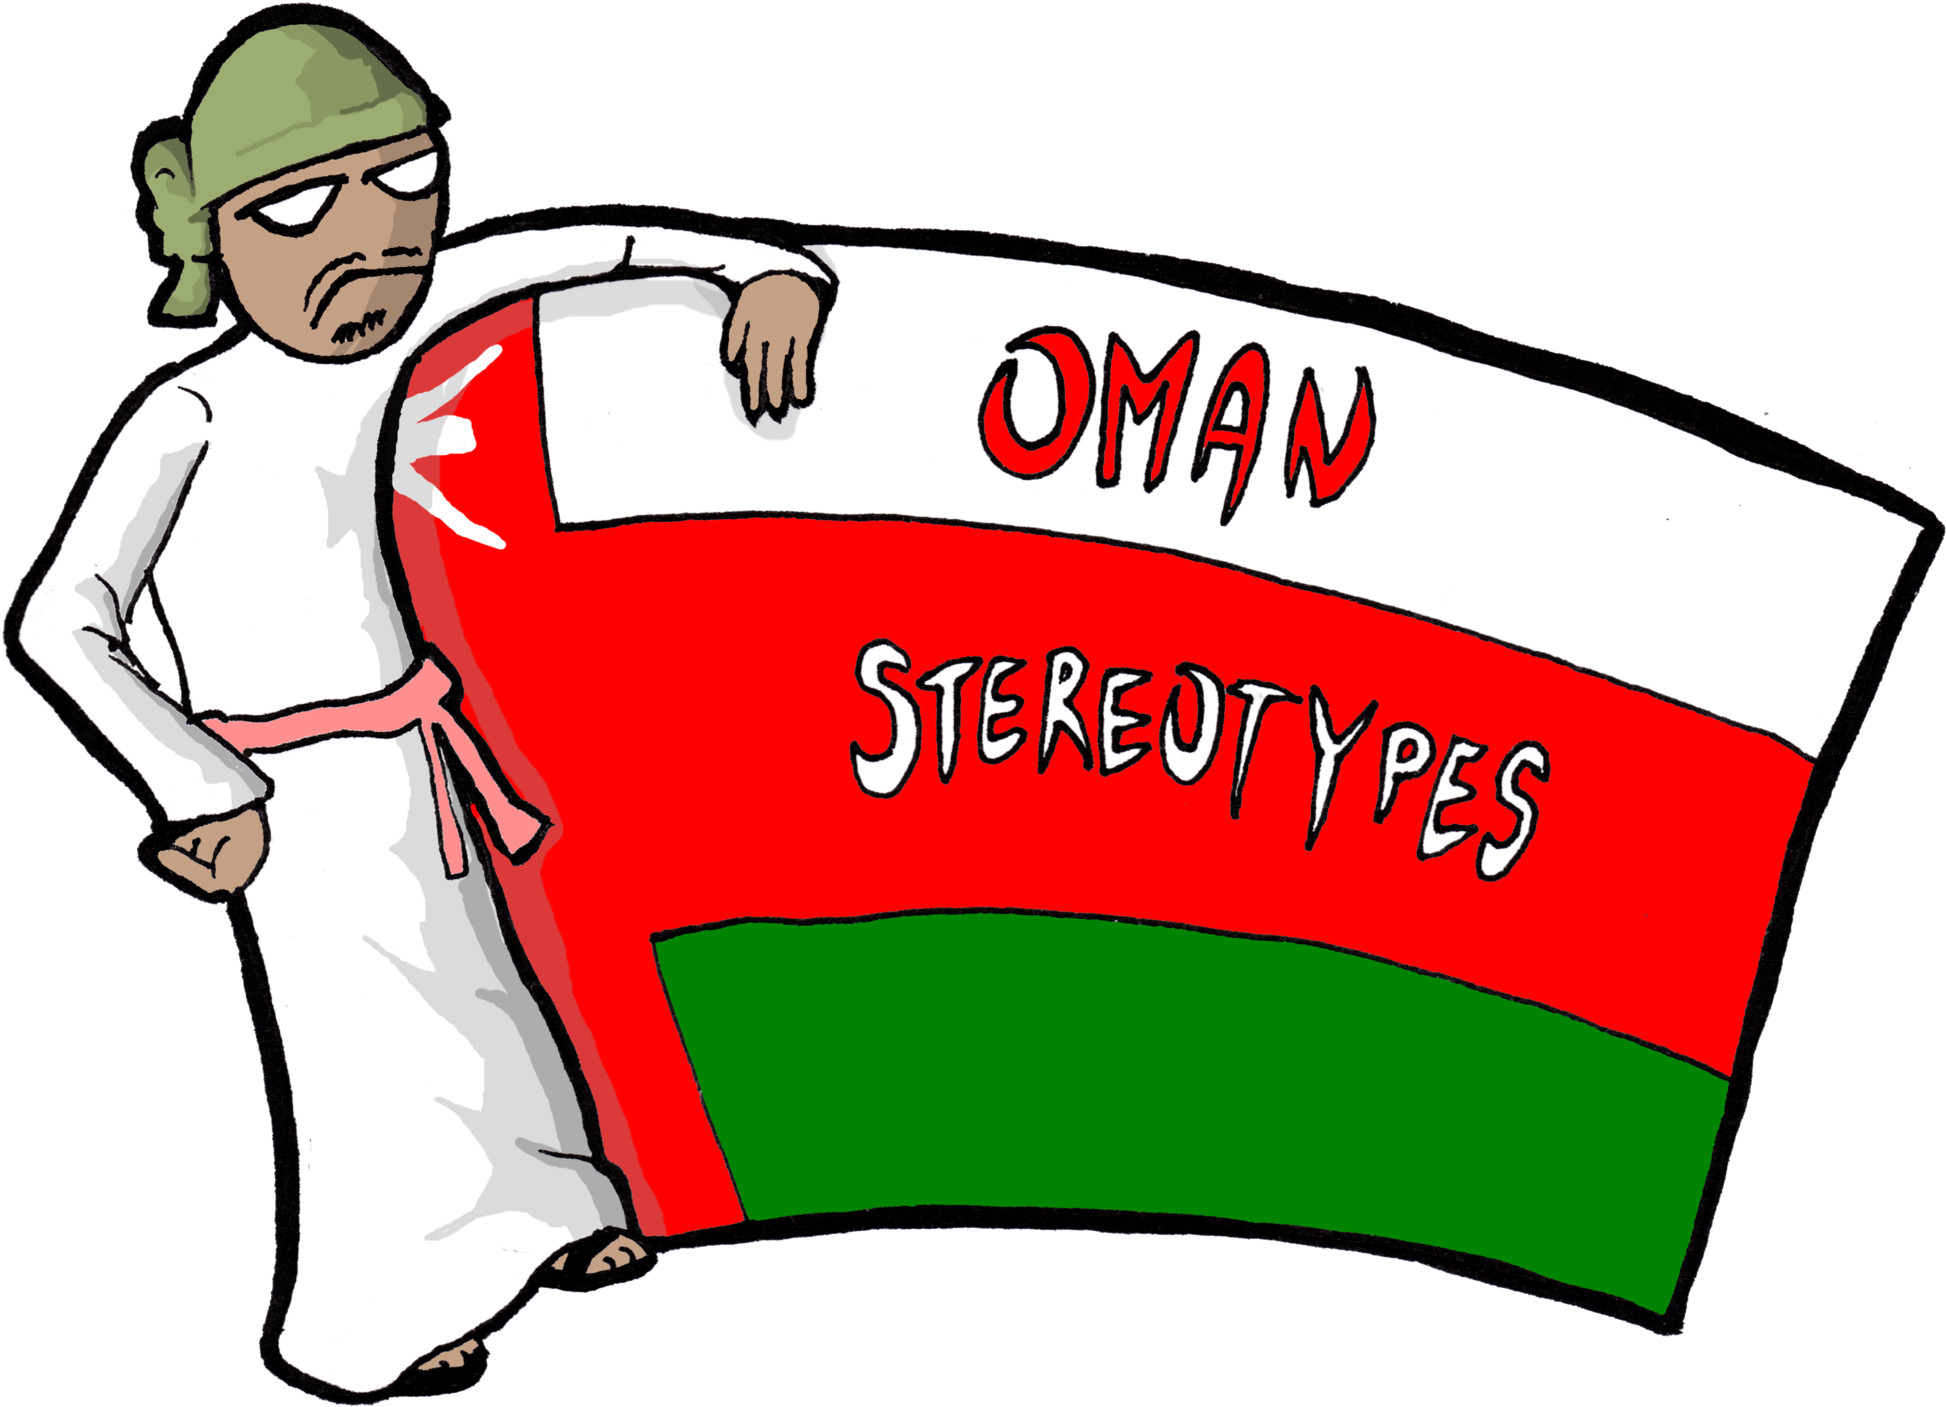 These Are The Main Problems Bothering Omani Youth Today - These Are The Main Problems Bothering Omani Youth Today (2500x1724)